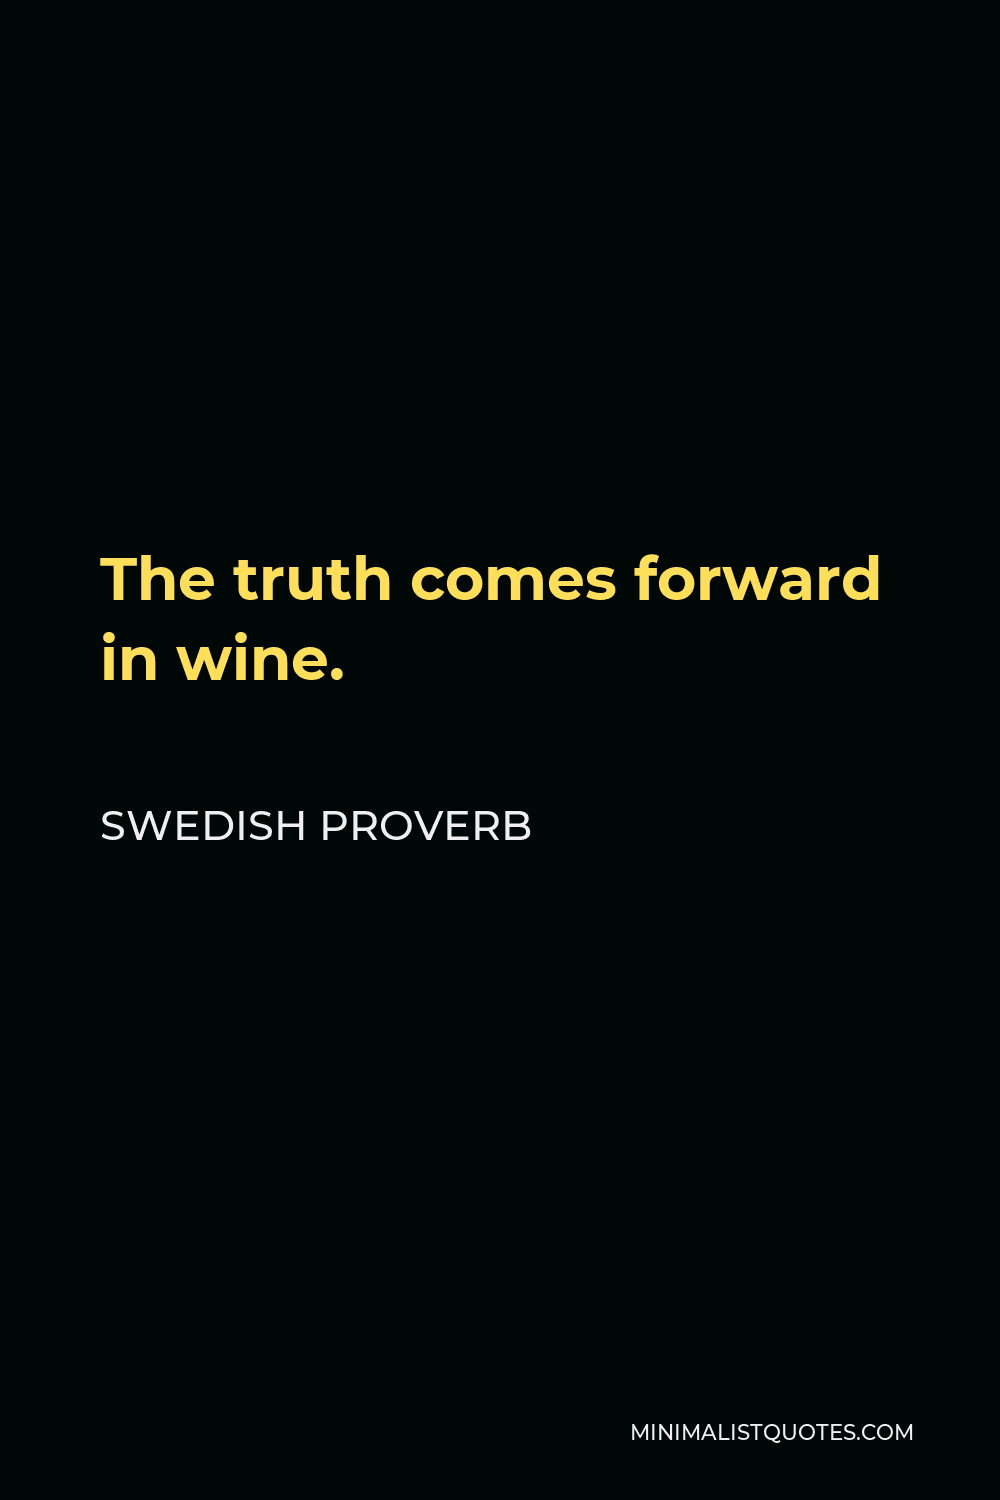 Swedish Proverb Quote - The truth comes forward in wine.